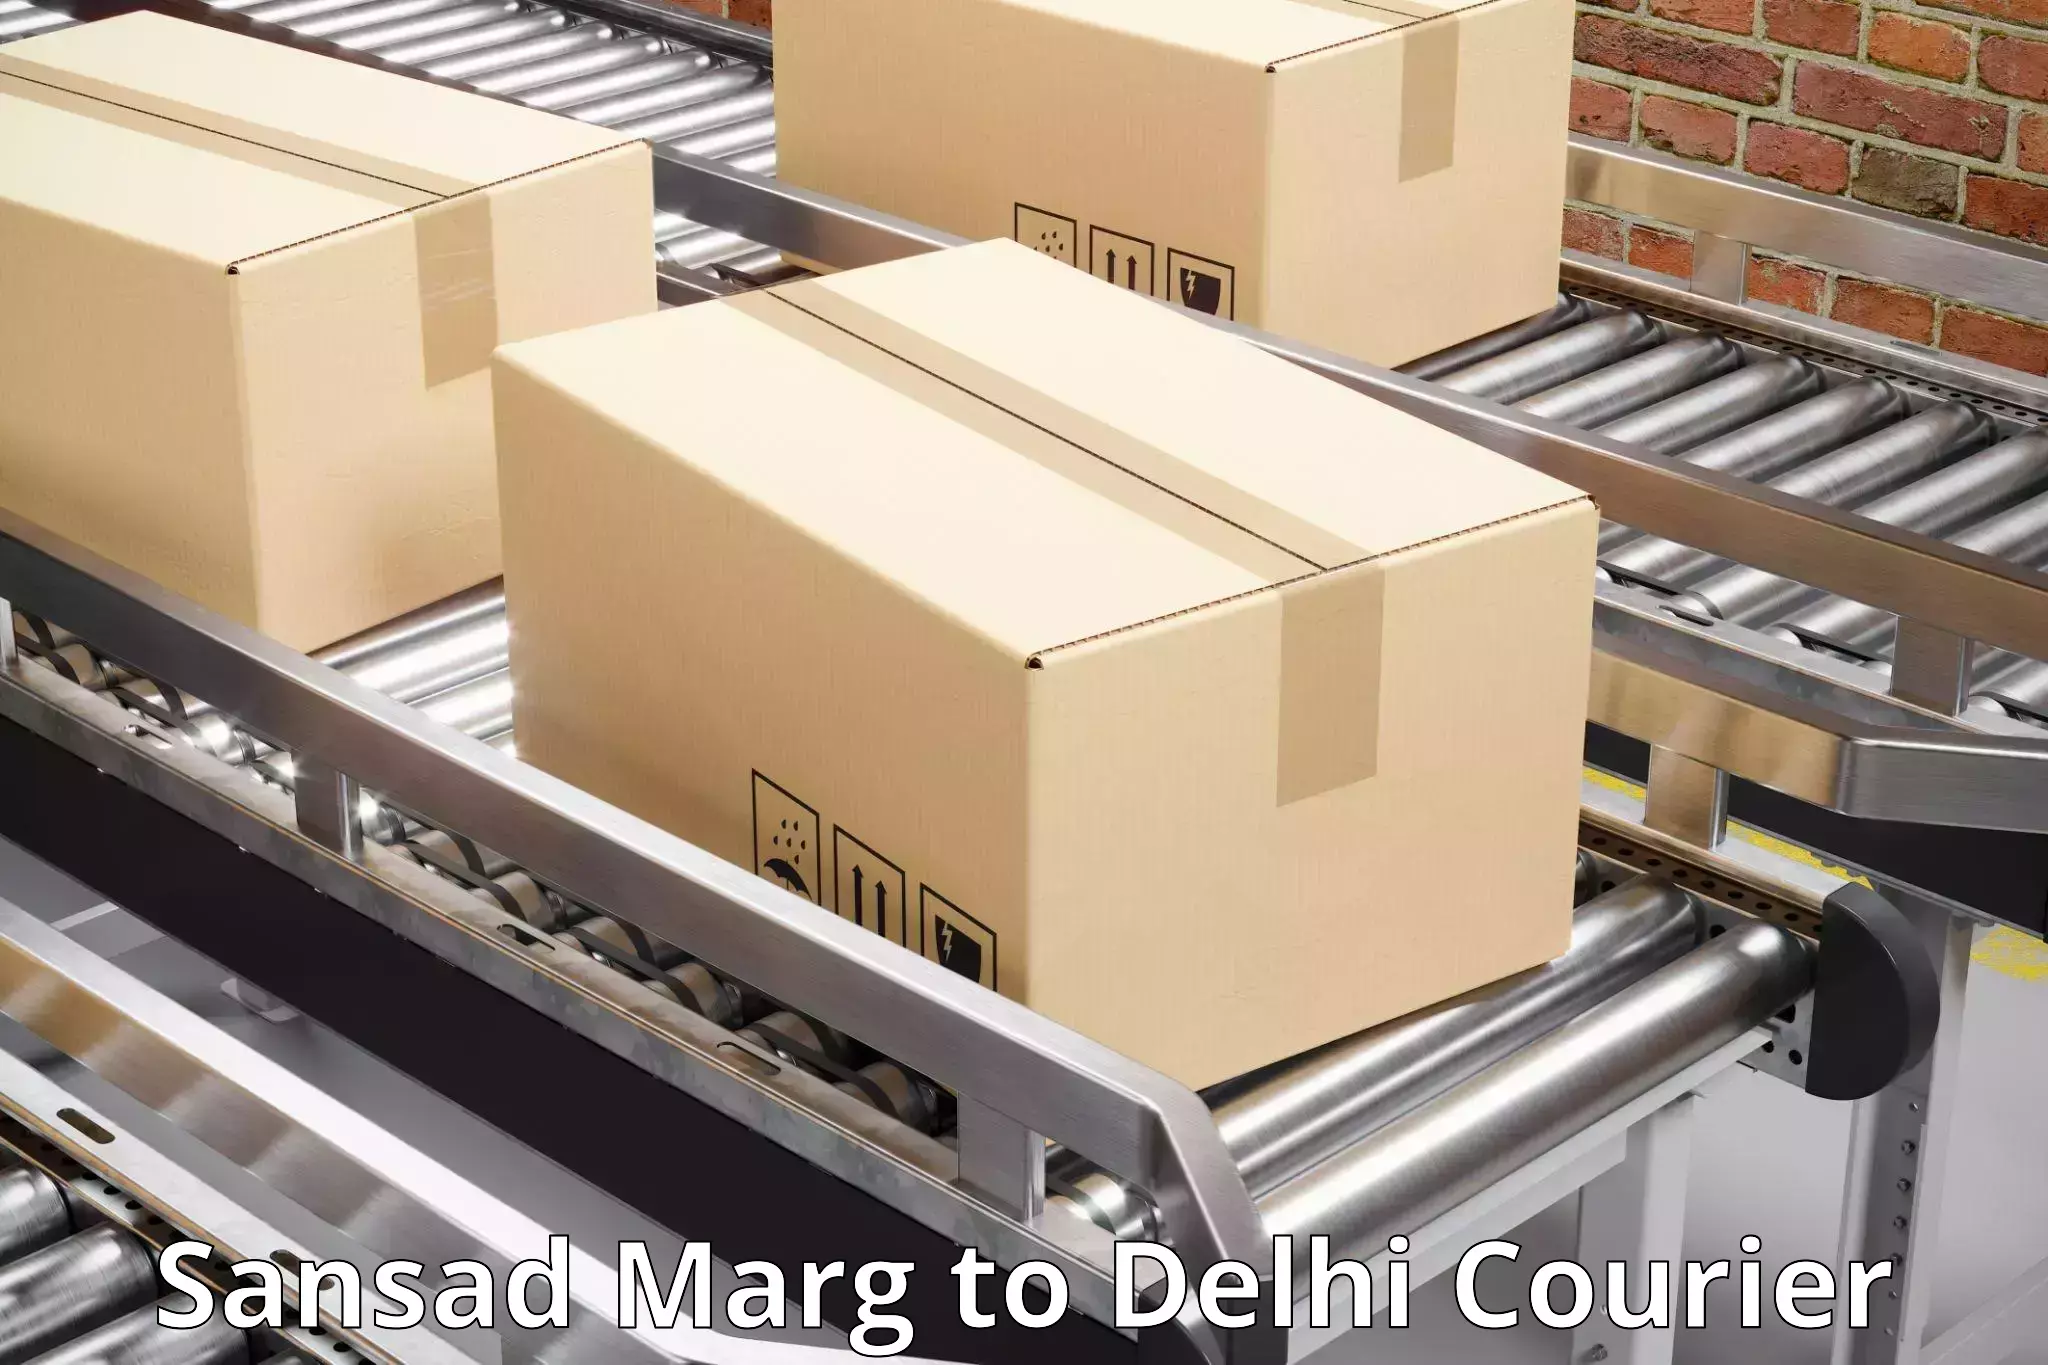 Same-day delivery solutions Sansad Marg to Lodhi Road